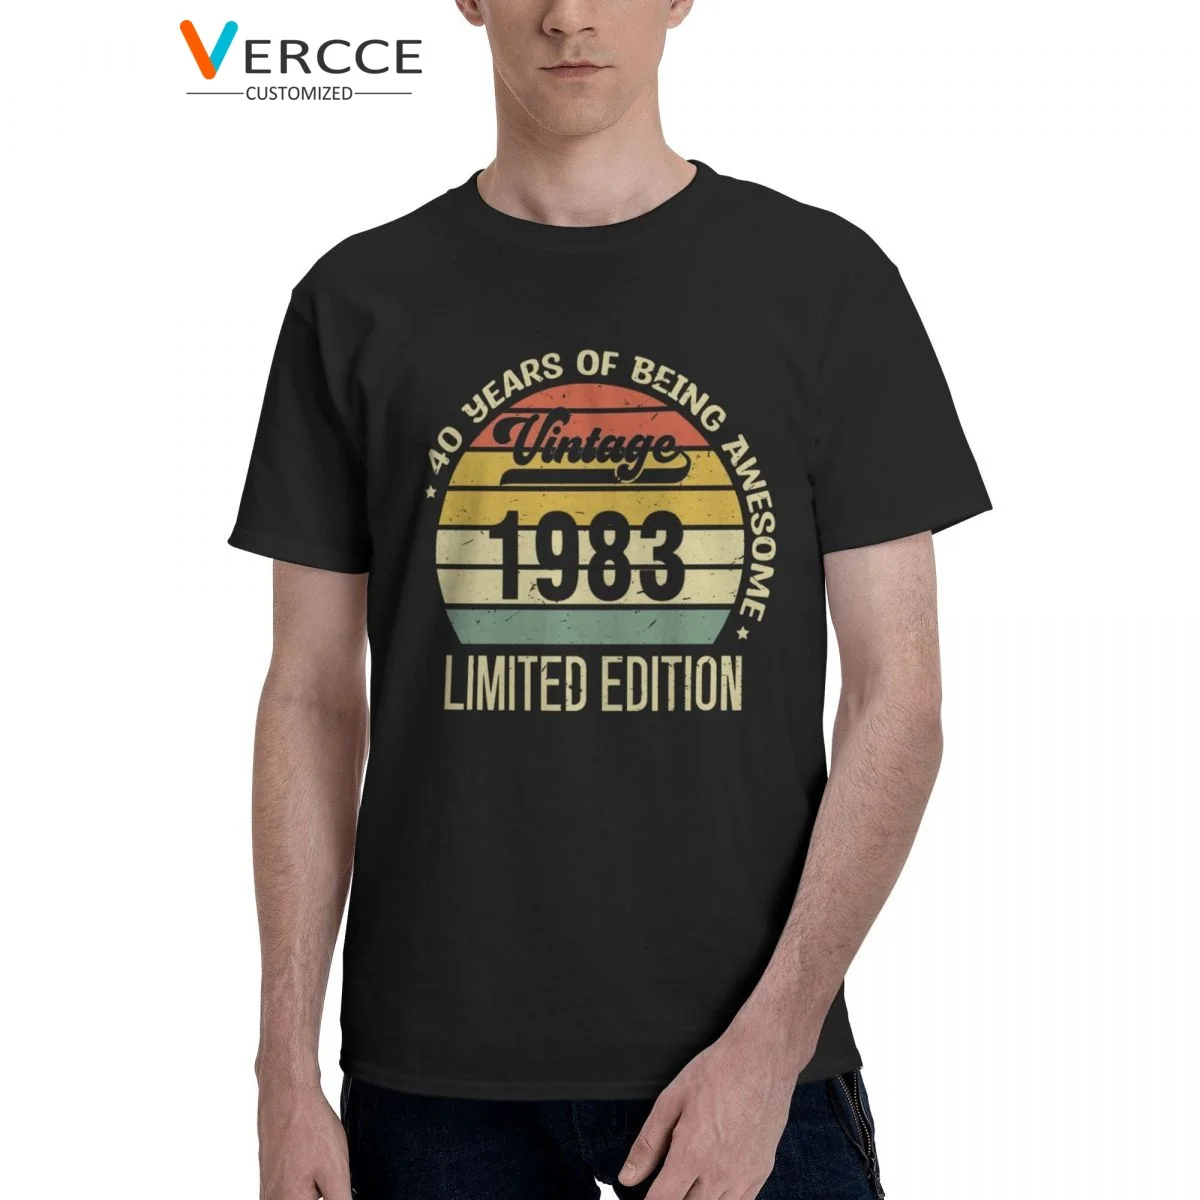 

Vintage 1983 Limited Edition 40 Year Old Gifts 40th Birthday T Shirt Cotton High Quality Tees Clothing Mens Women T Shirts